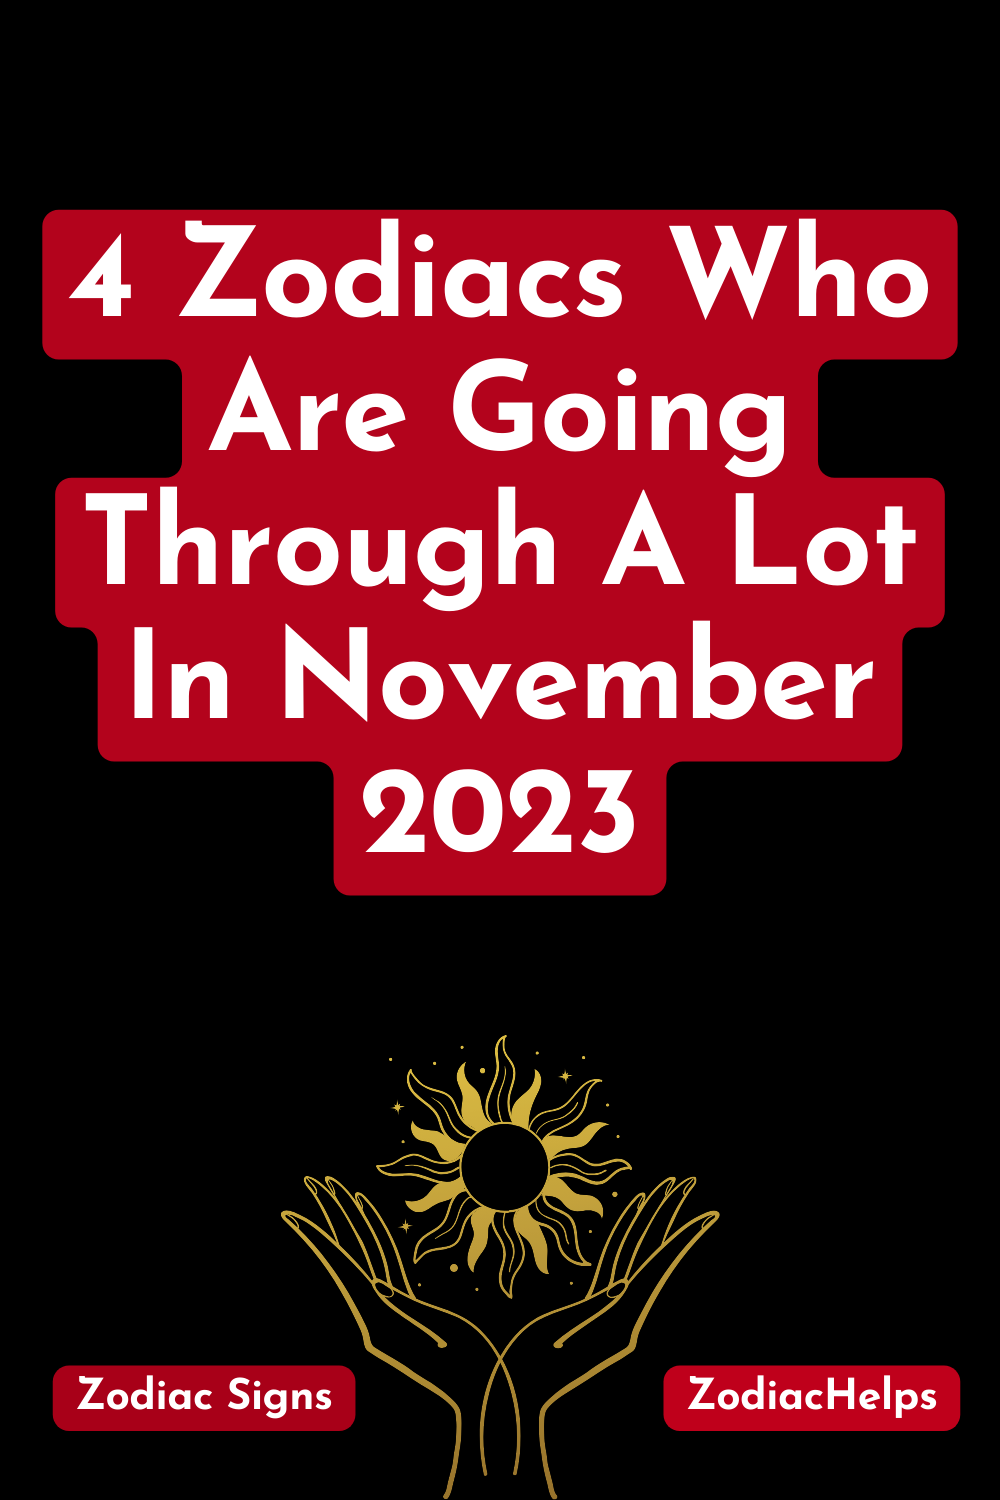 4 Zodiacs Who Are Going Through A Lot In November 2023